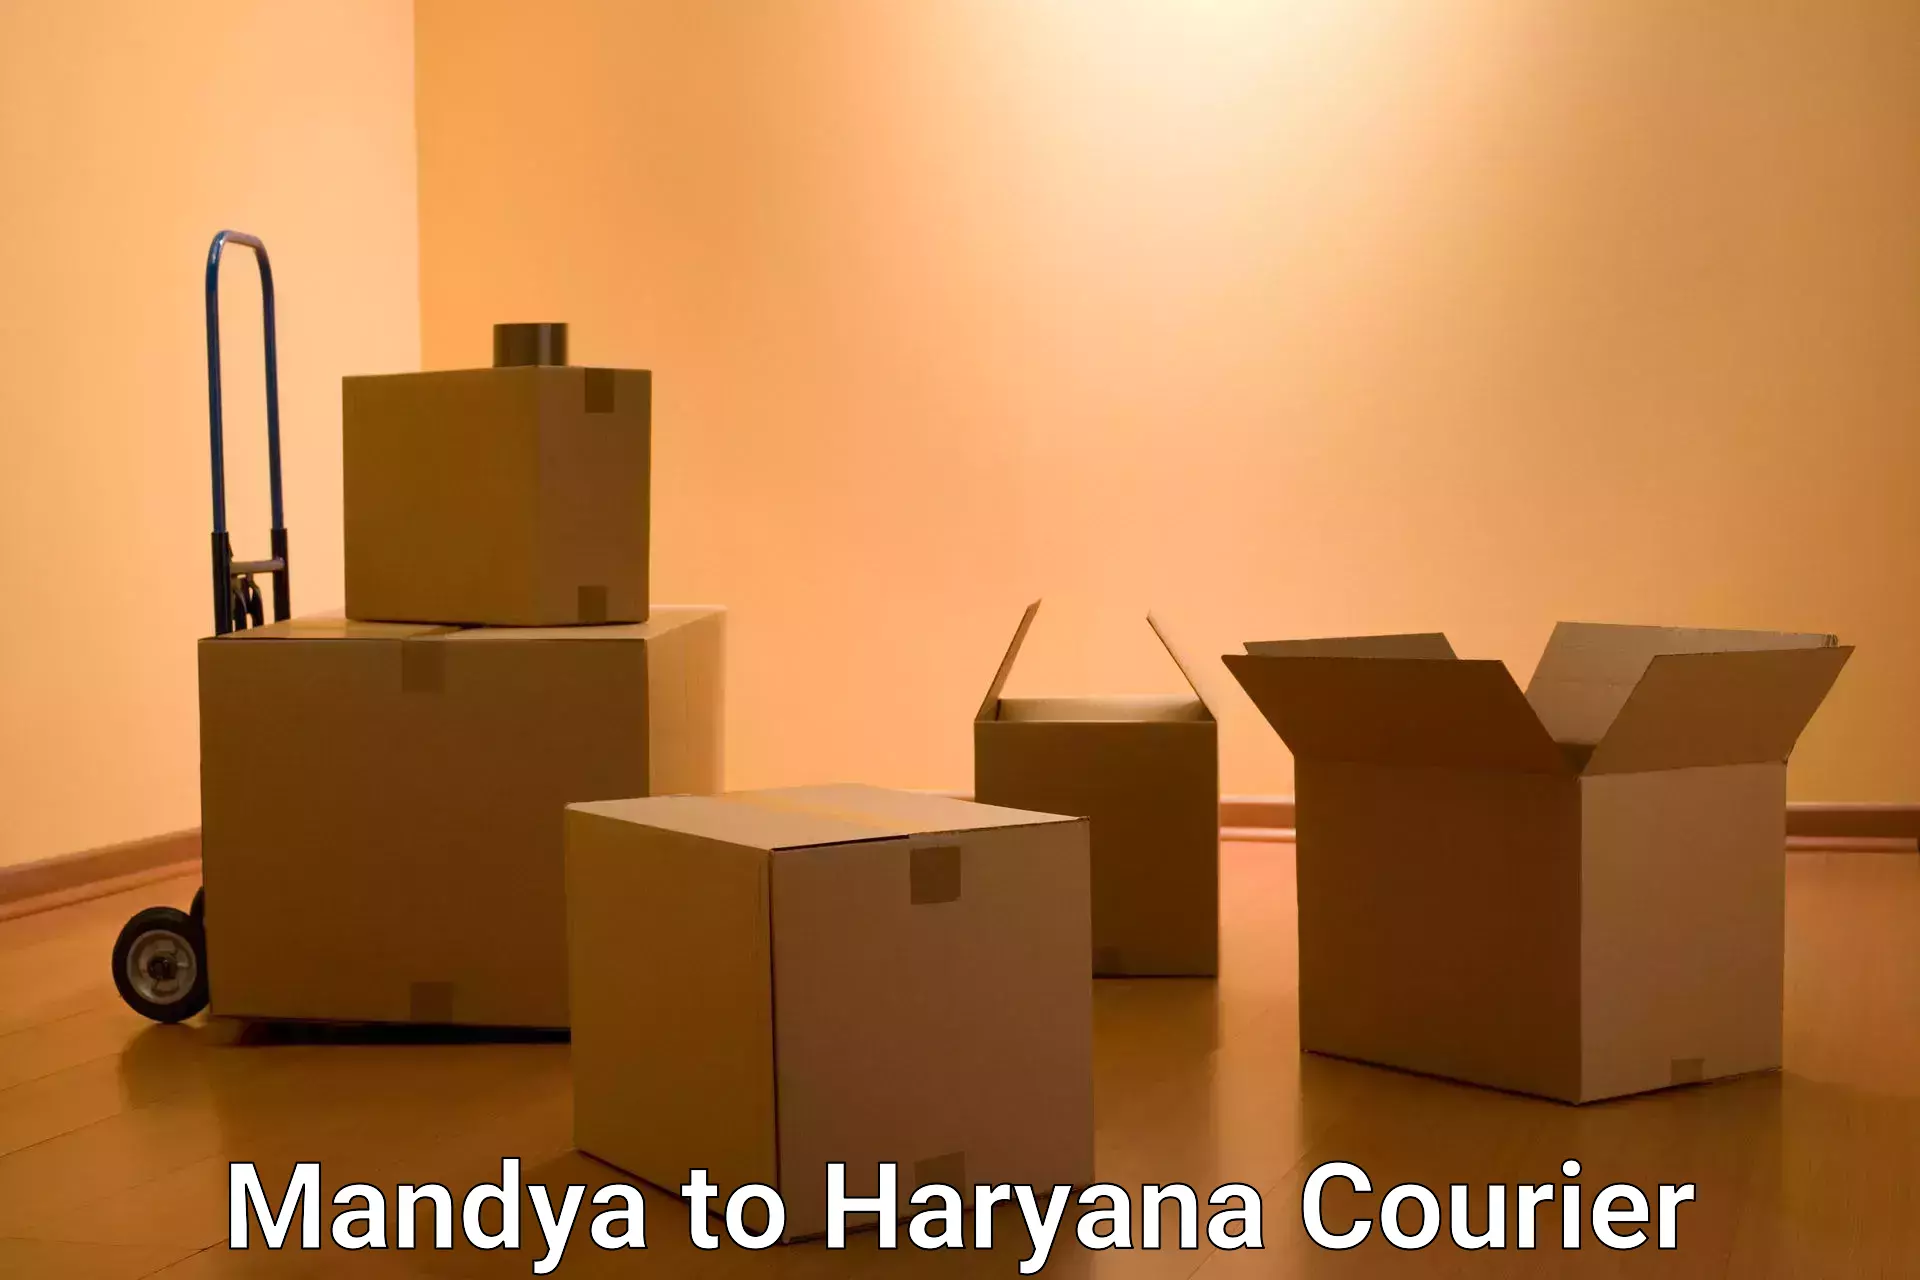 Subscription-based courier Mandya to Haryana